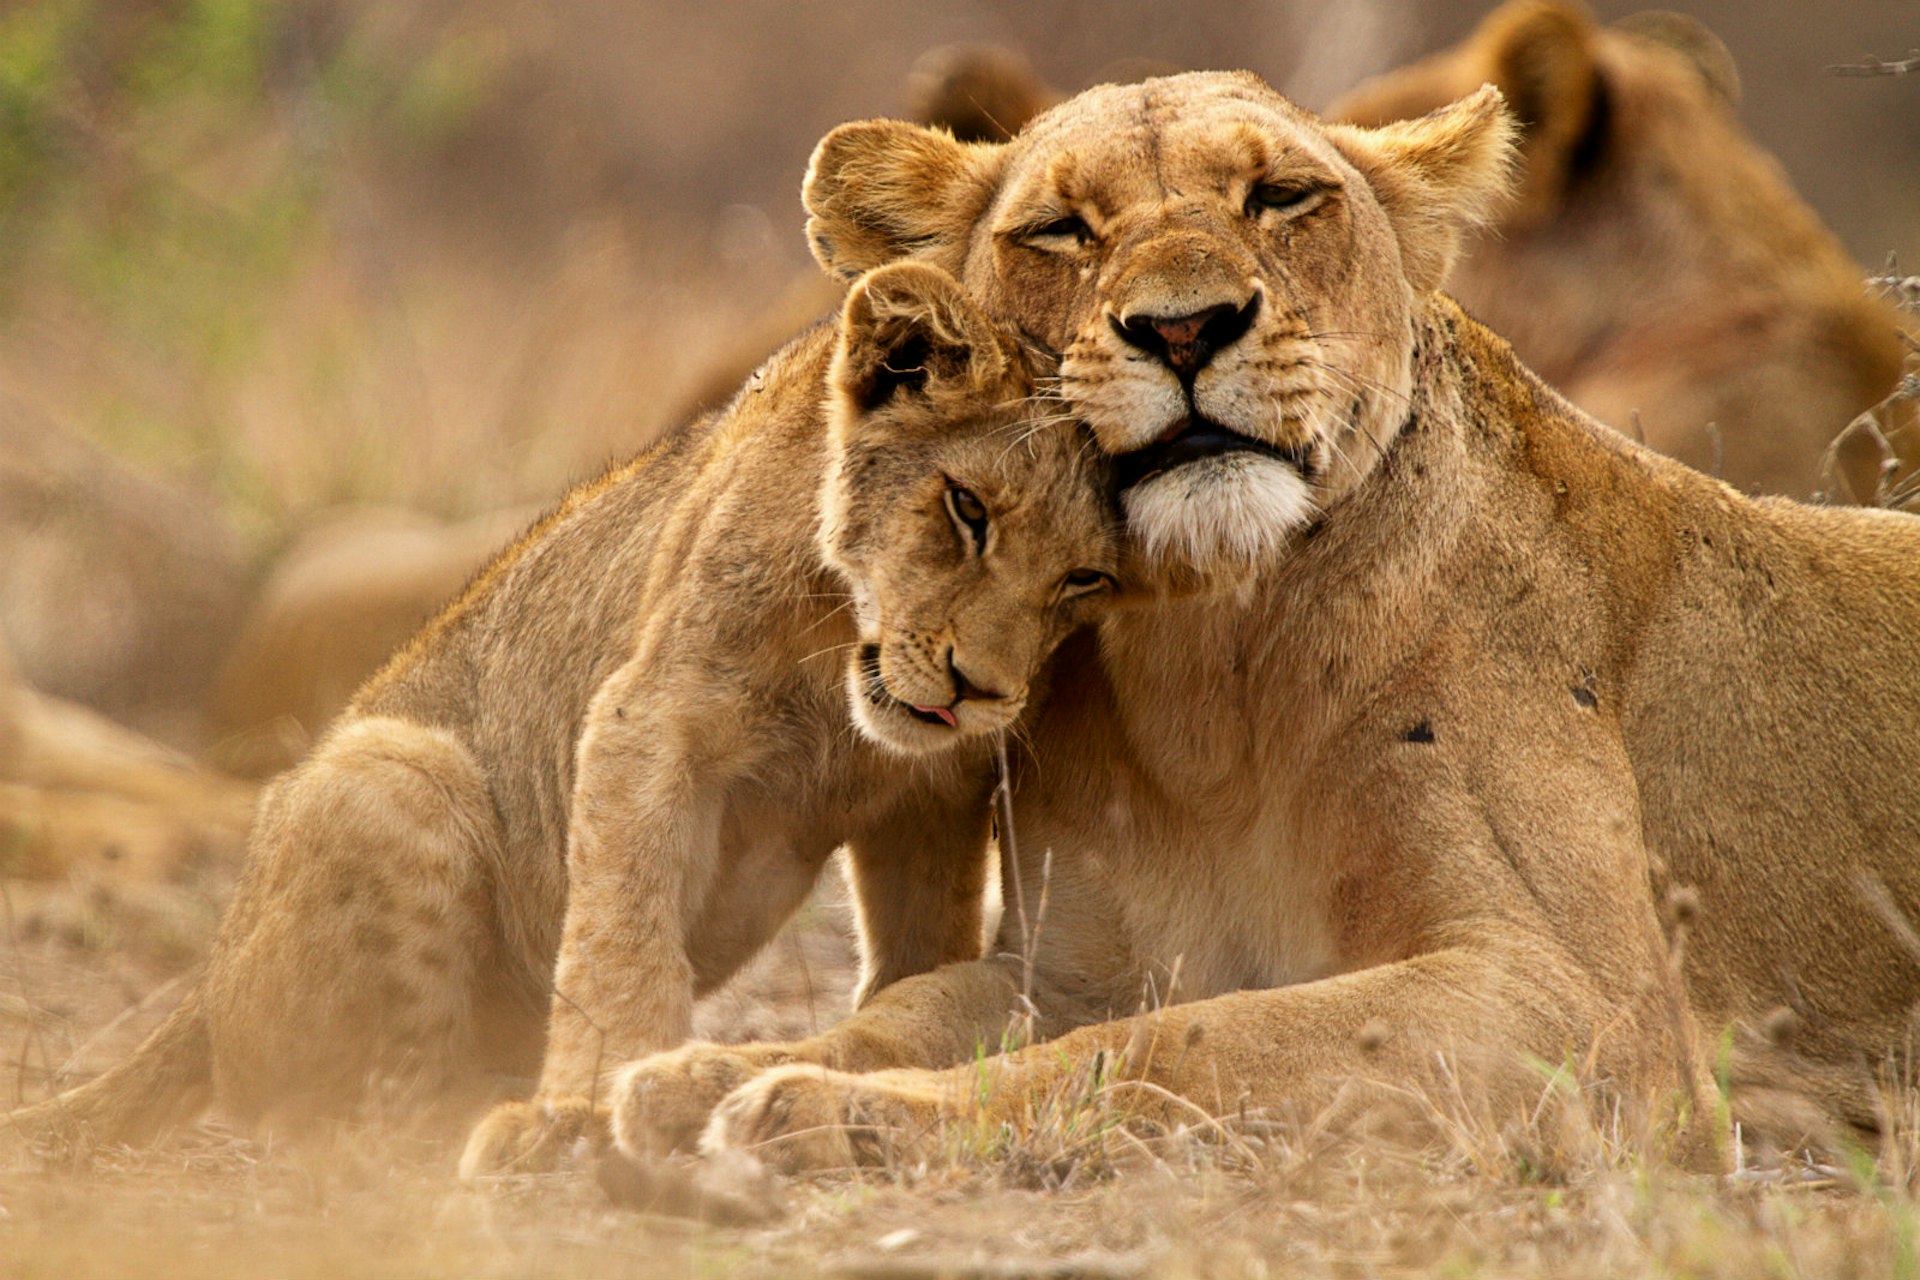 Lion and lioness in Kruger National Park © Thomas Retterath / Getty Images